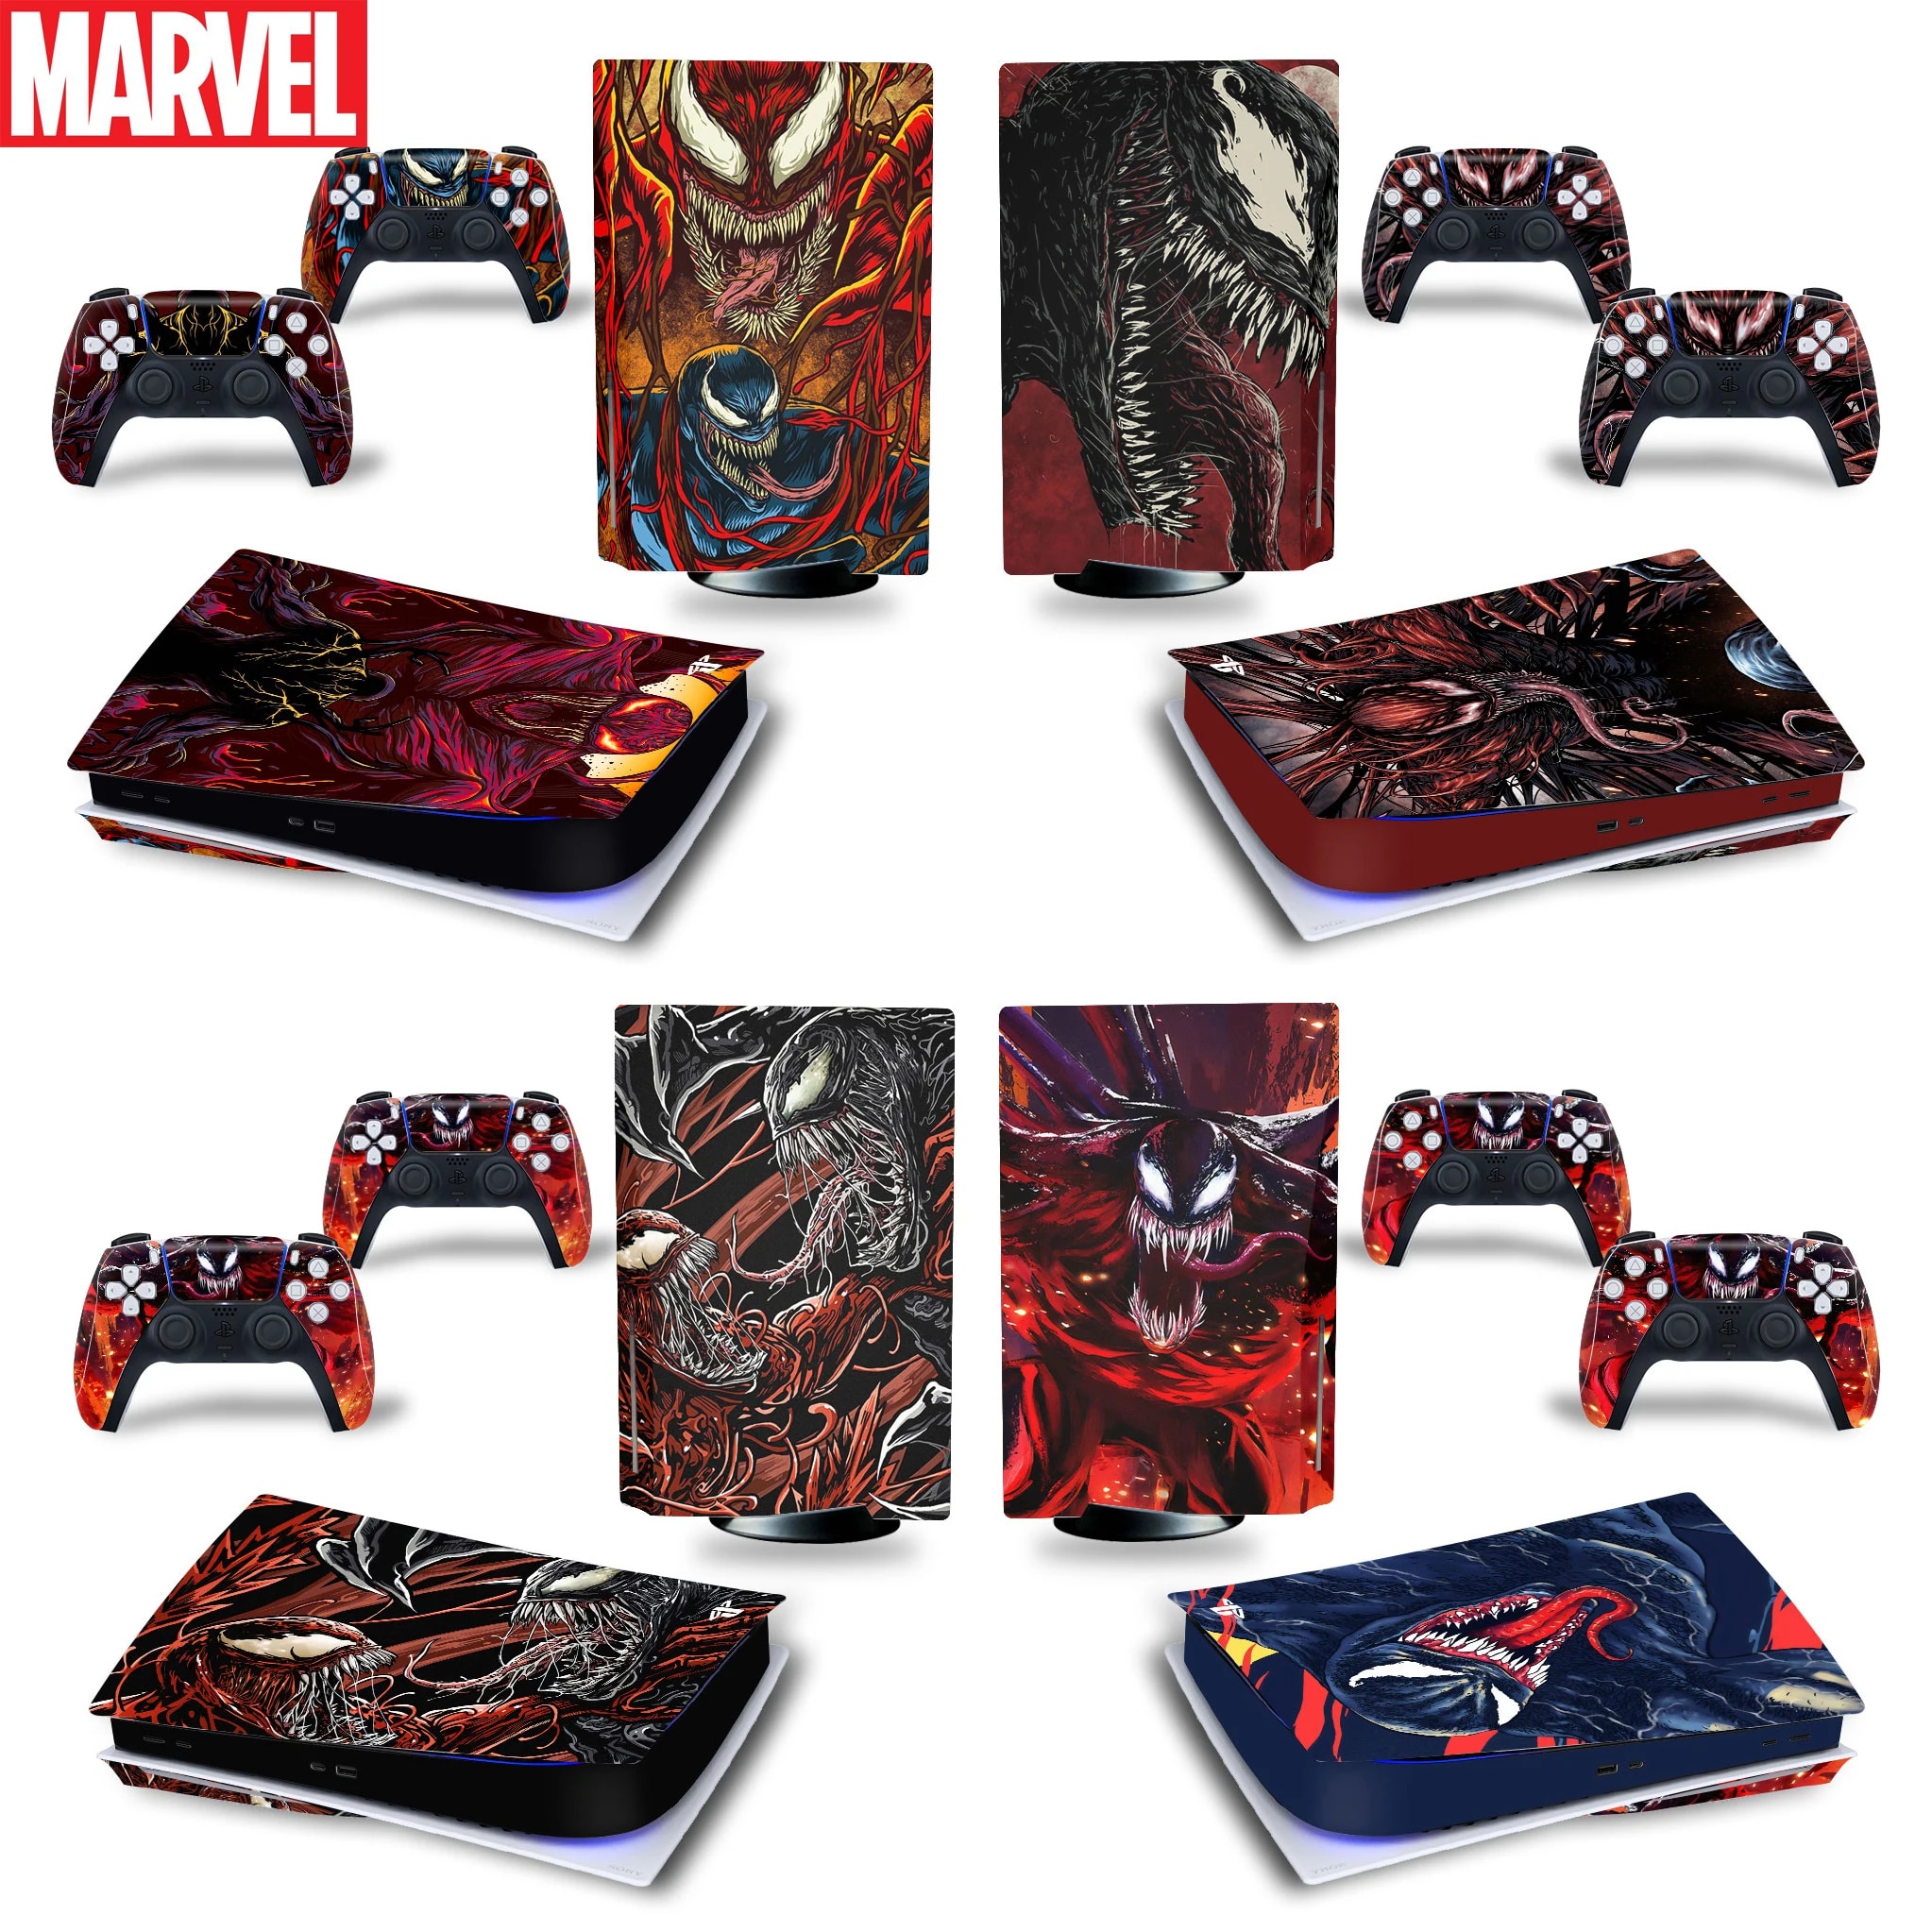 【Popular choice】 Venom Carnage Ps5 Disc Edition Skin Sticker Decal For 5 Console And 2 Controllers Ps5 Disc Skin Sticker Vinyl